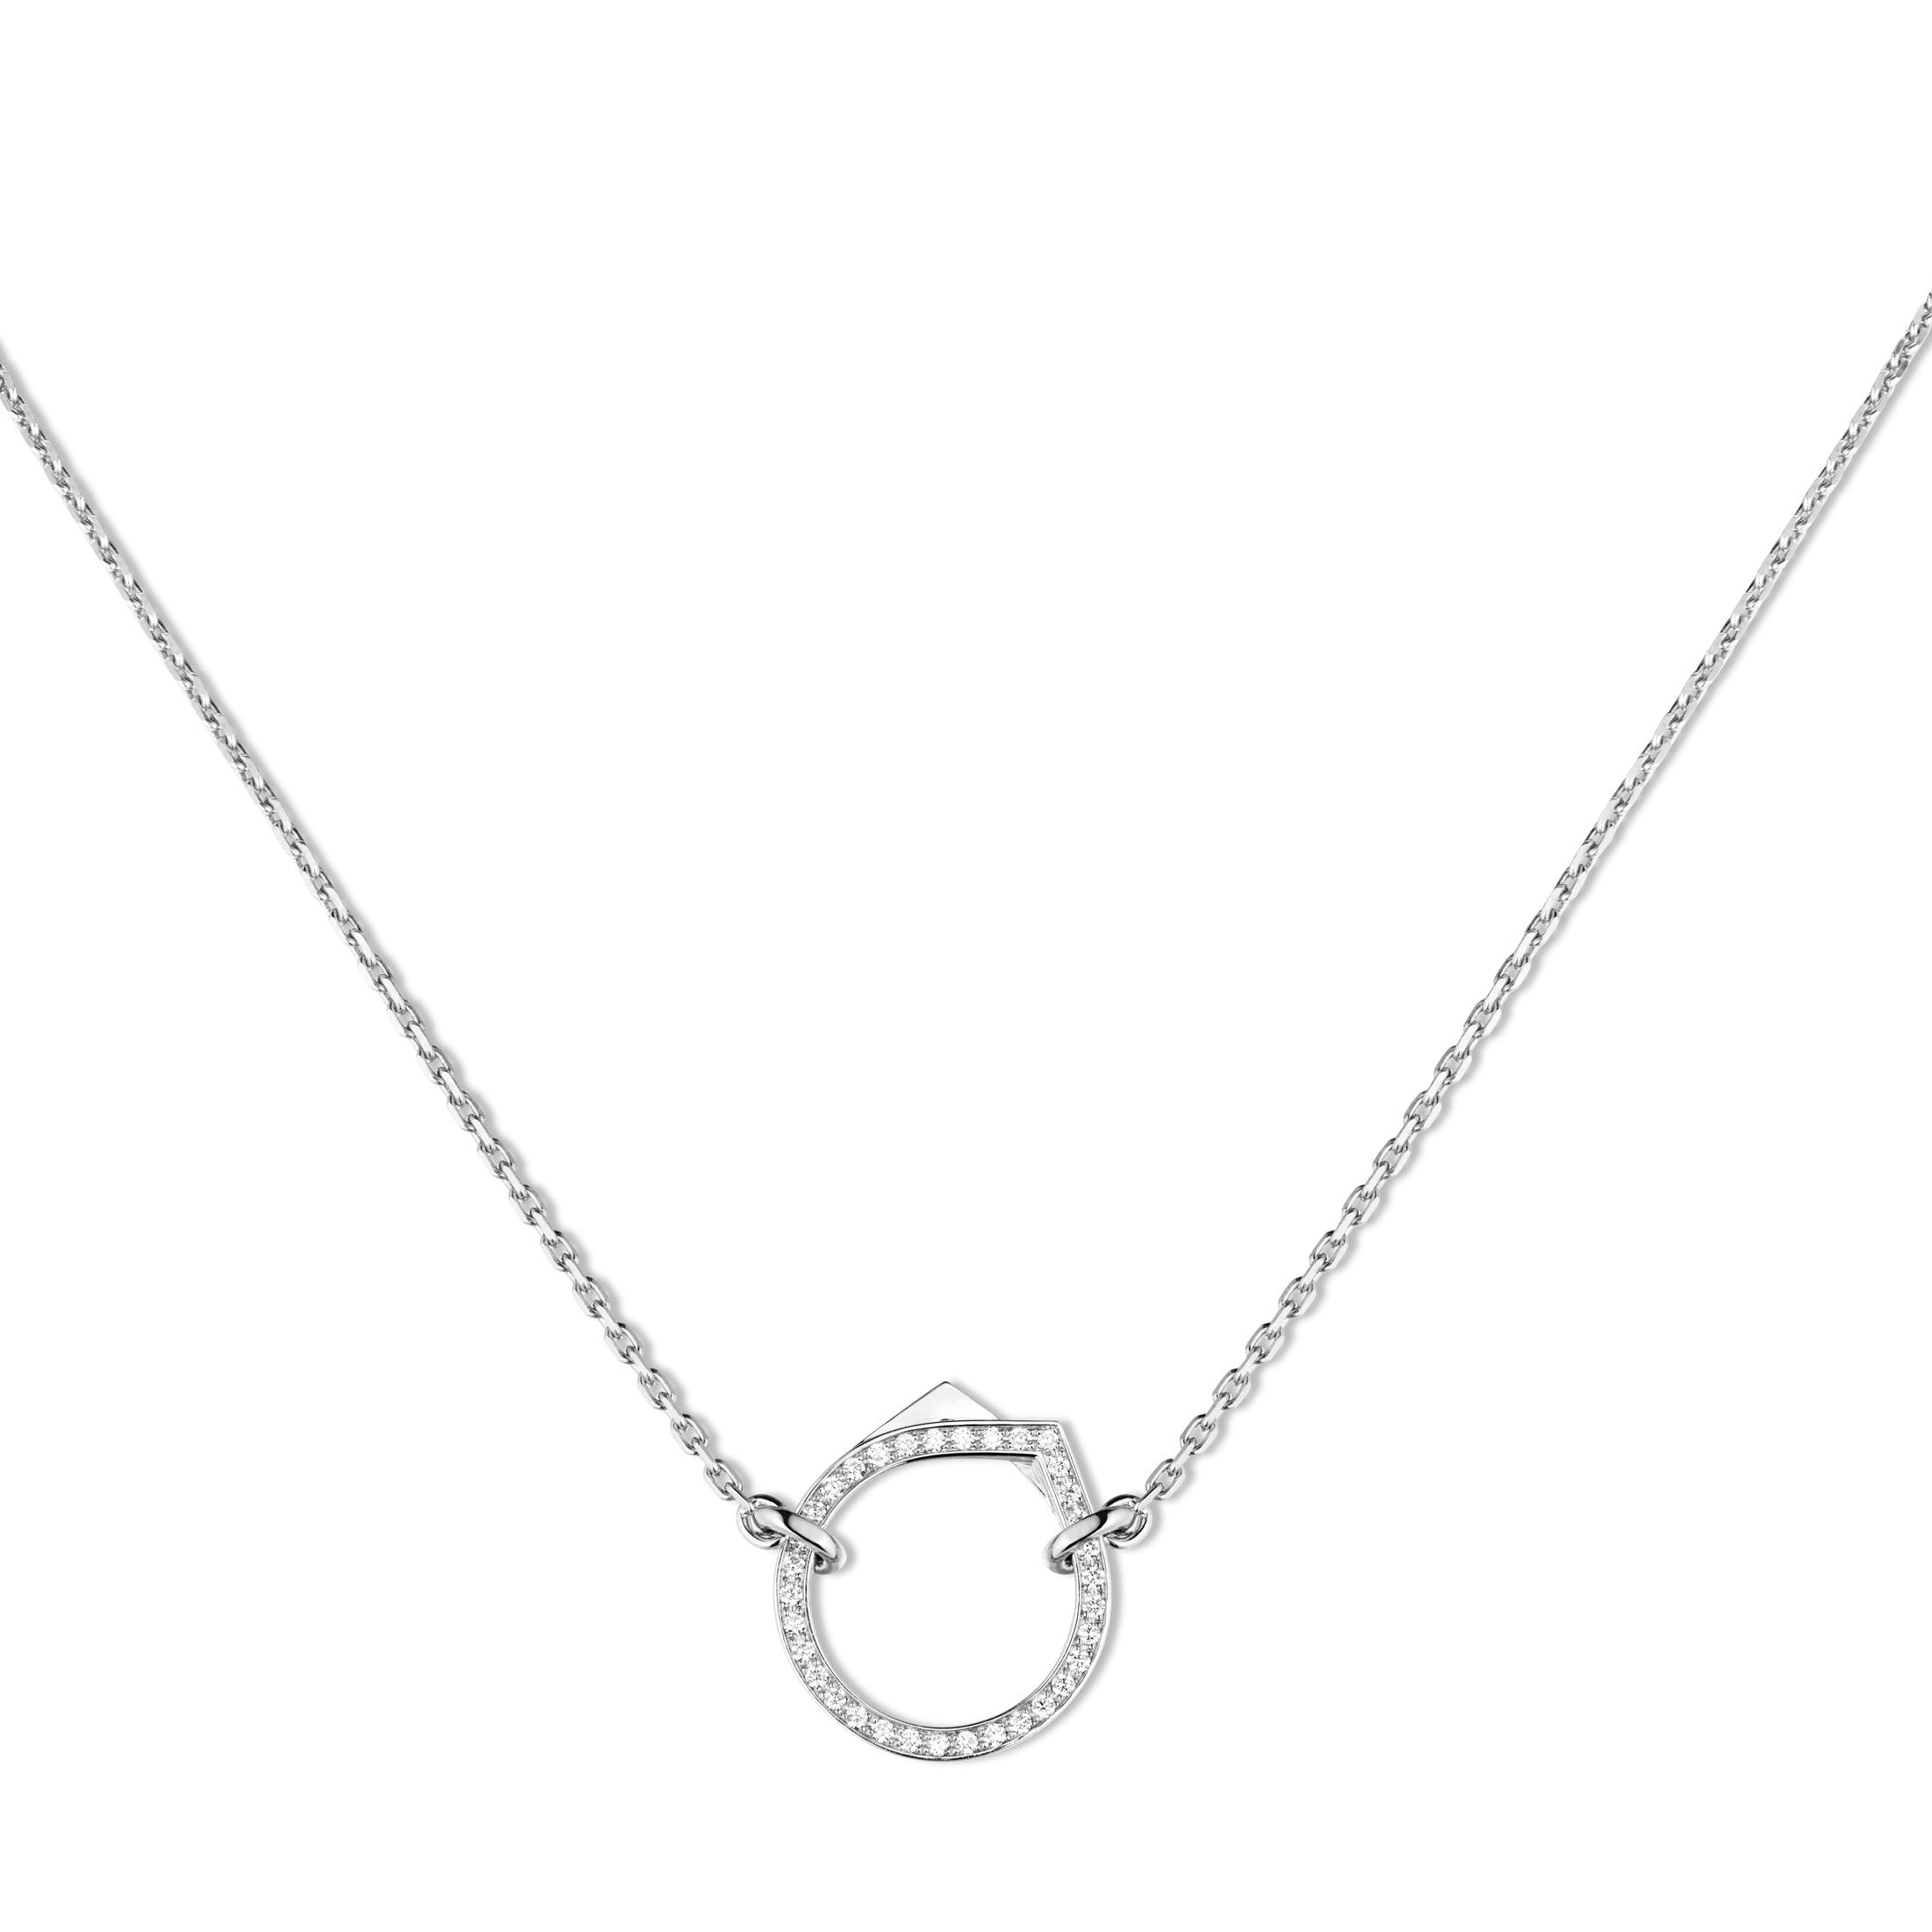 Antifer pendant in white gold paved with diamonds